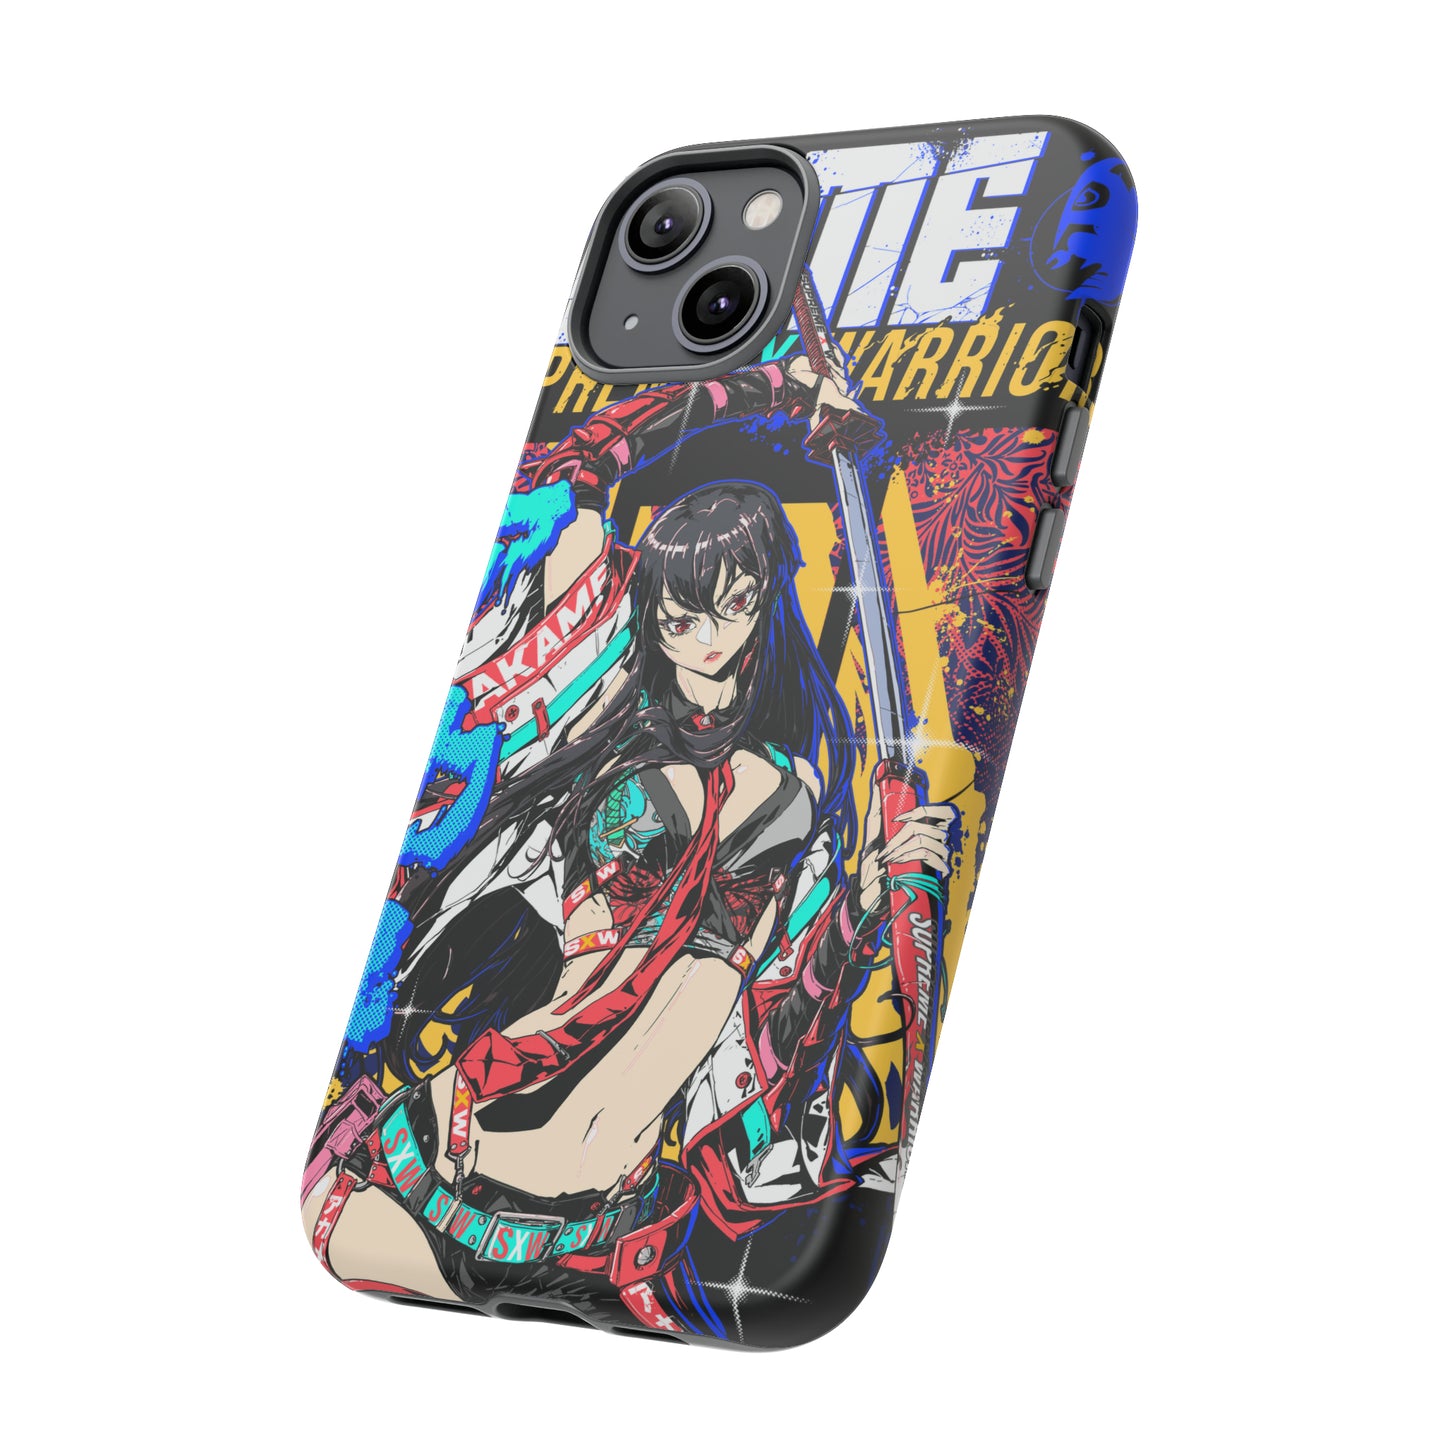 Akame / iPhone Case